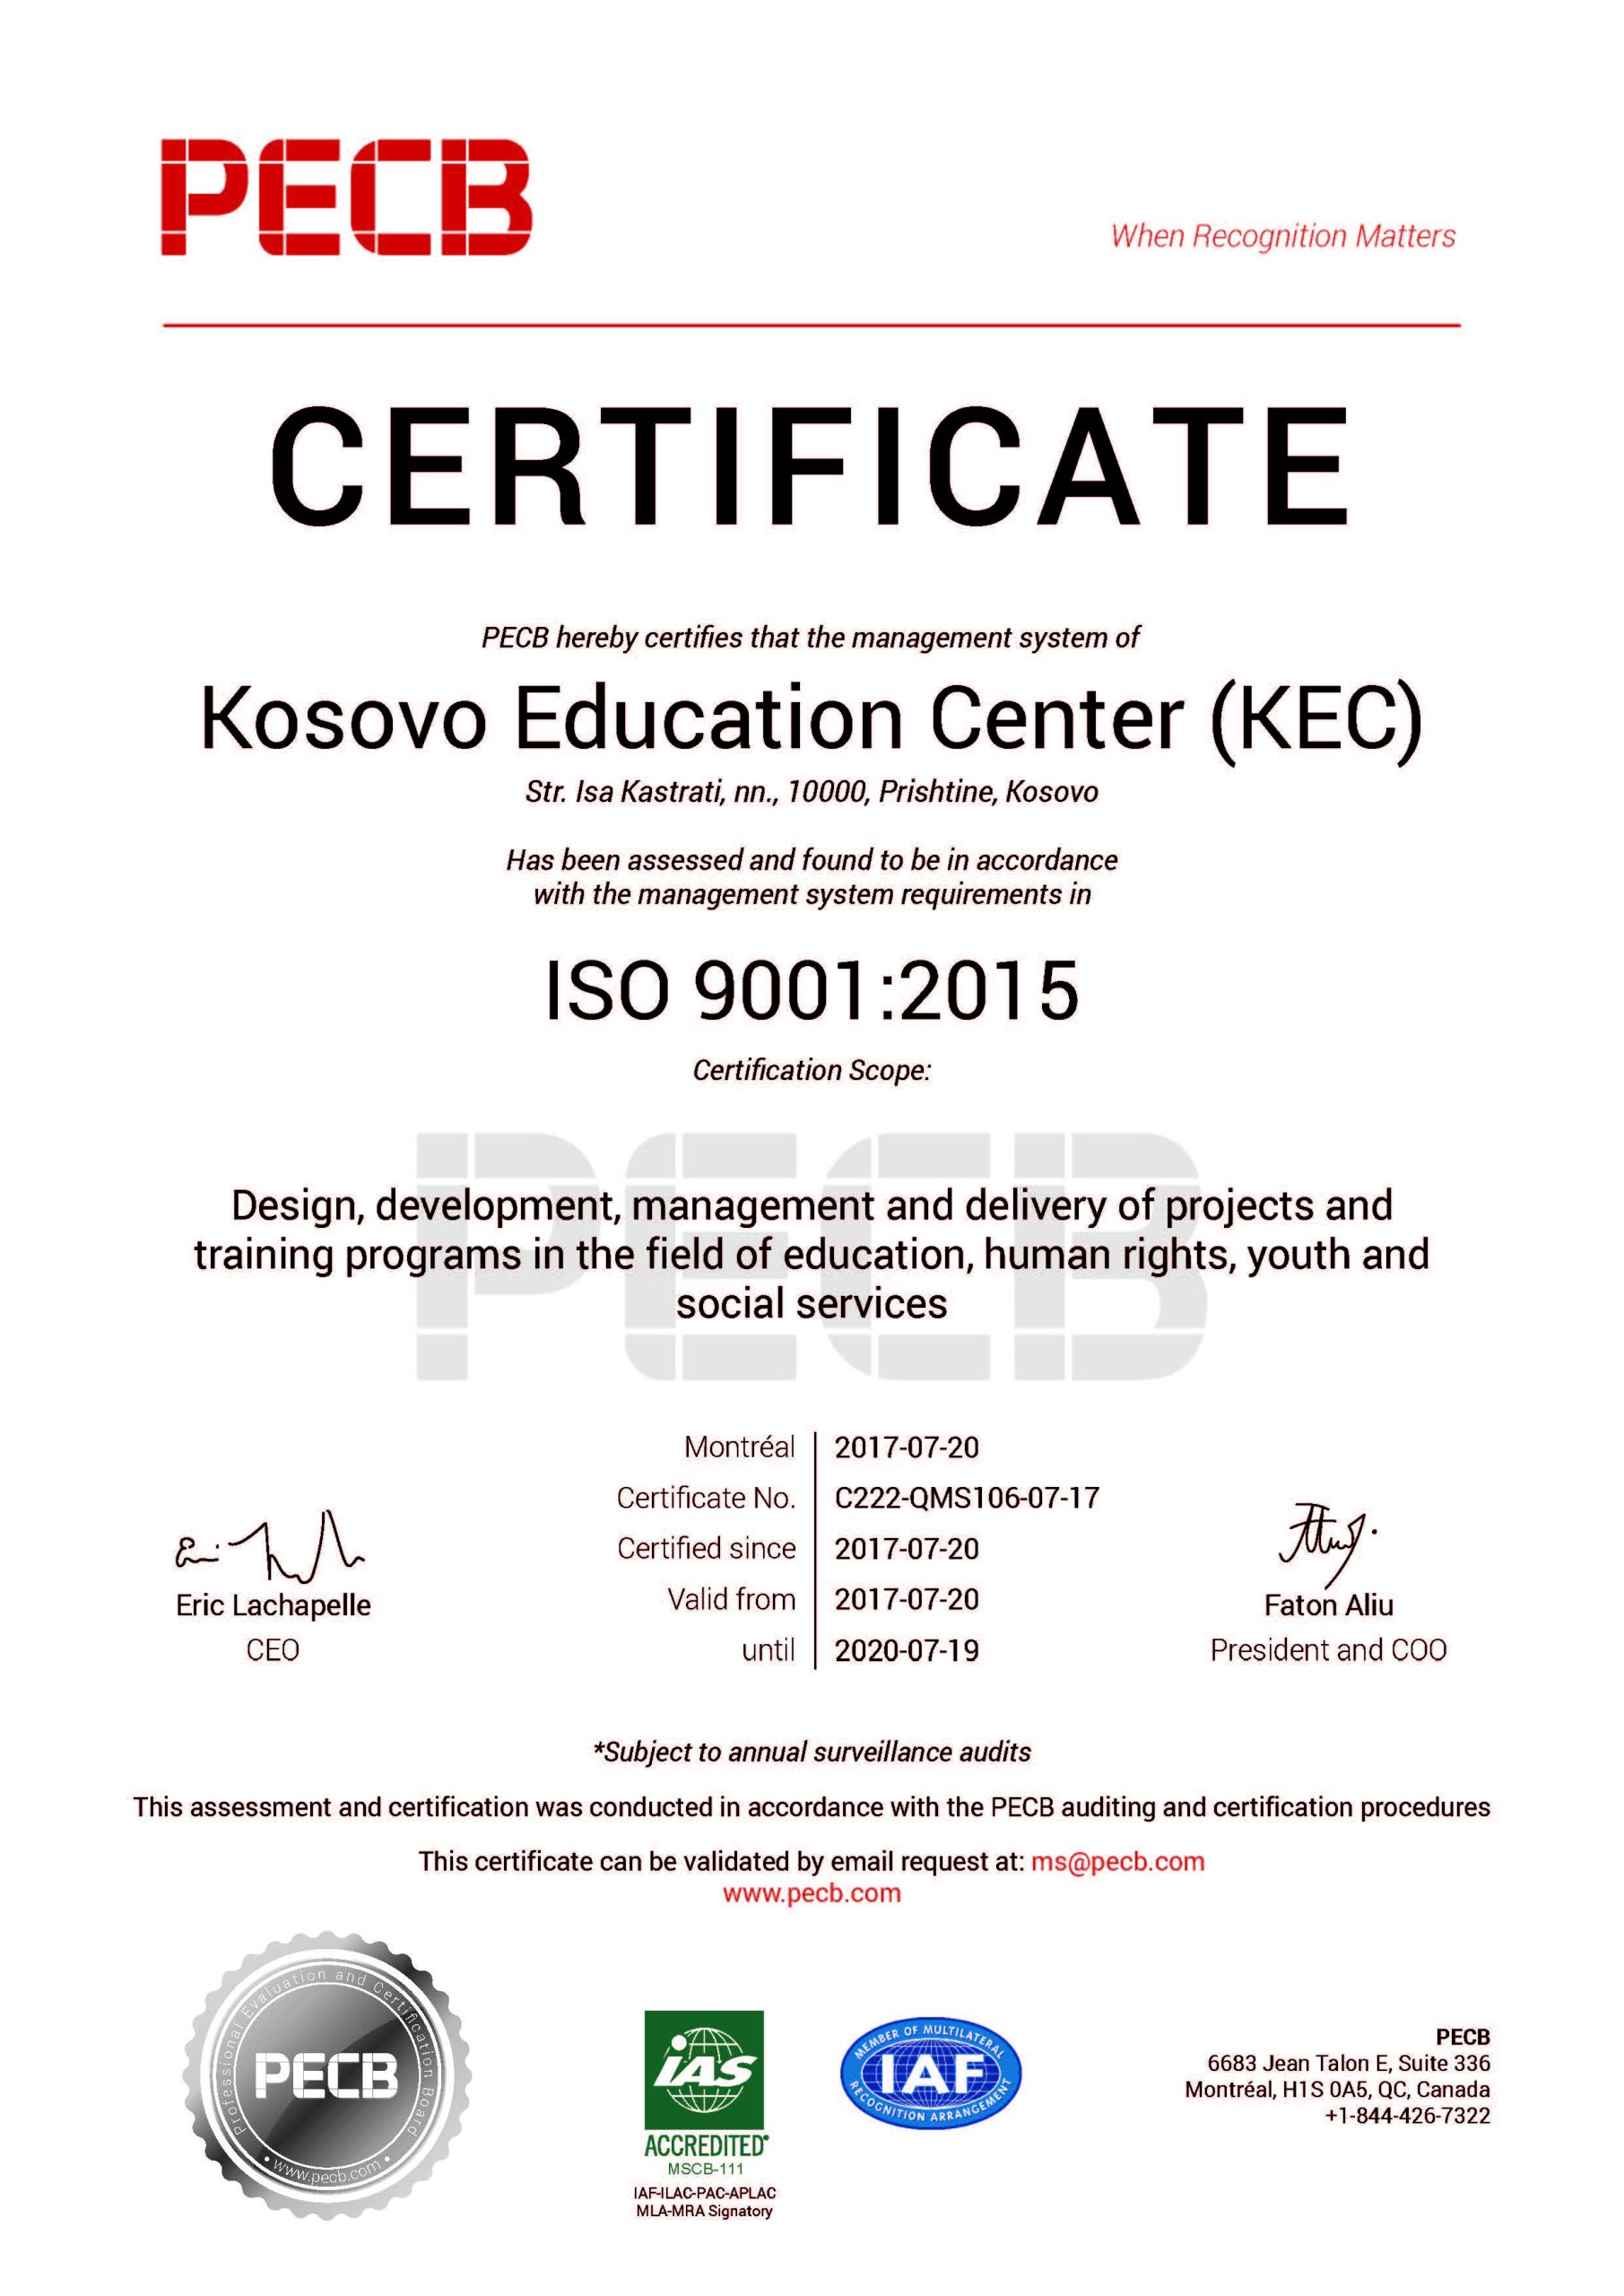 KEC is certified for ISO 9001:2015